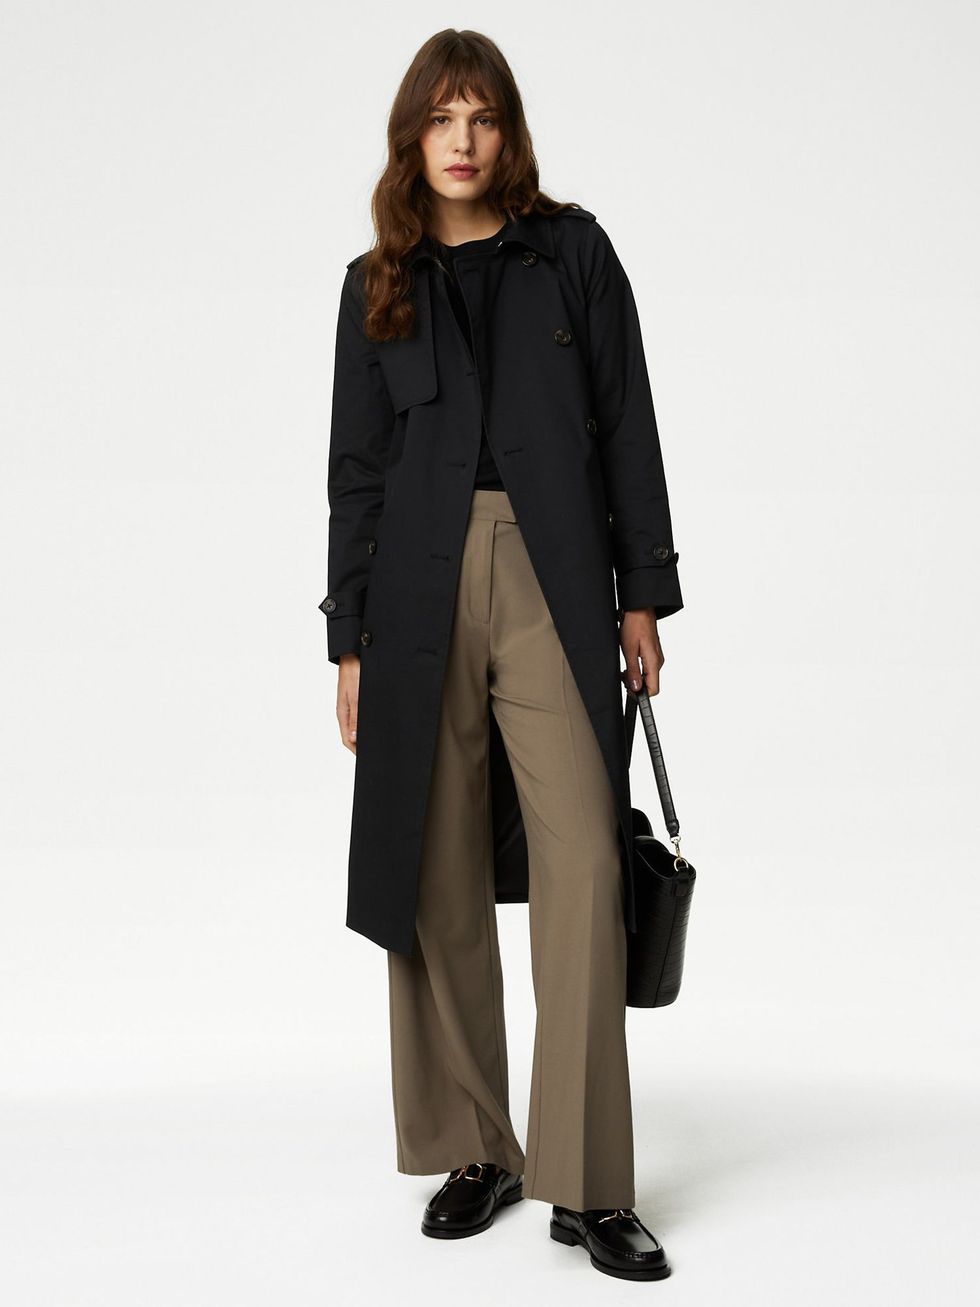 Cotton Rich Belted Longline Trench Coat